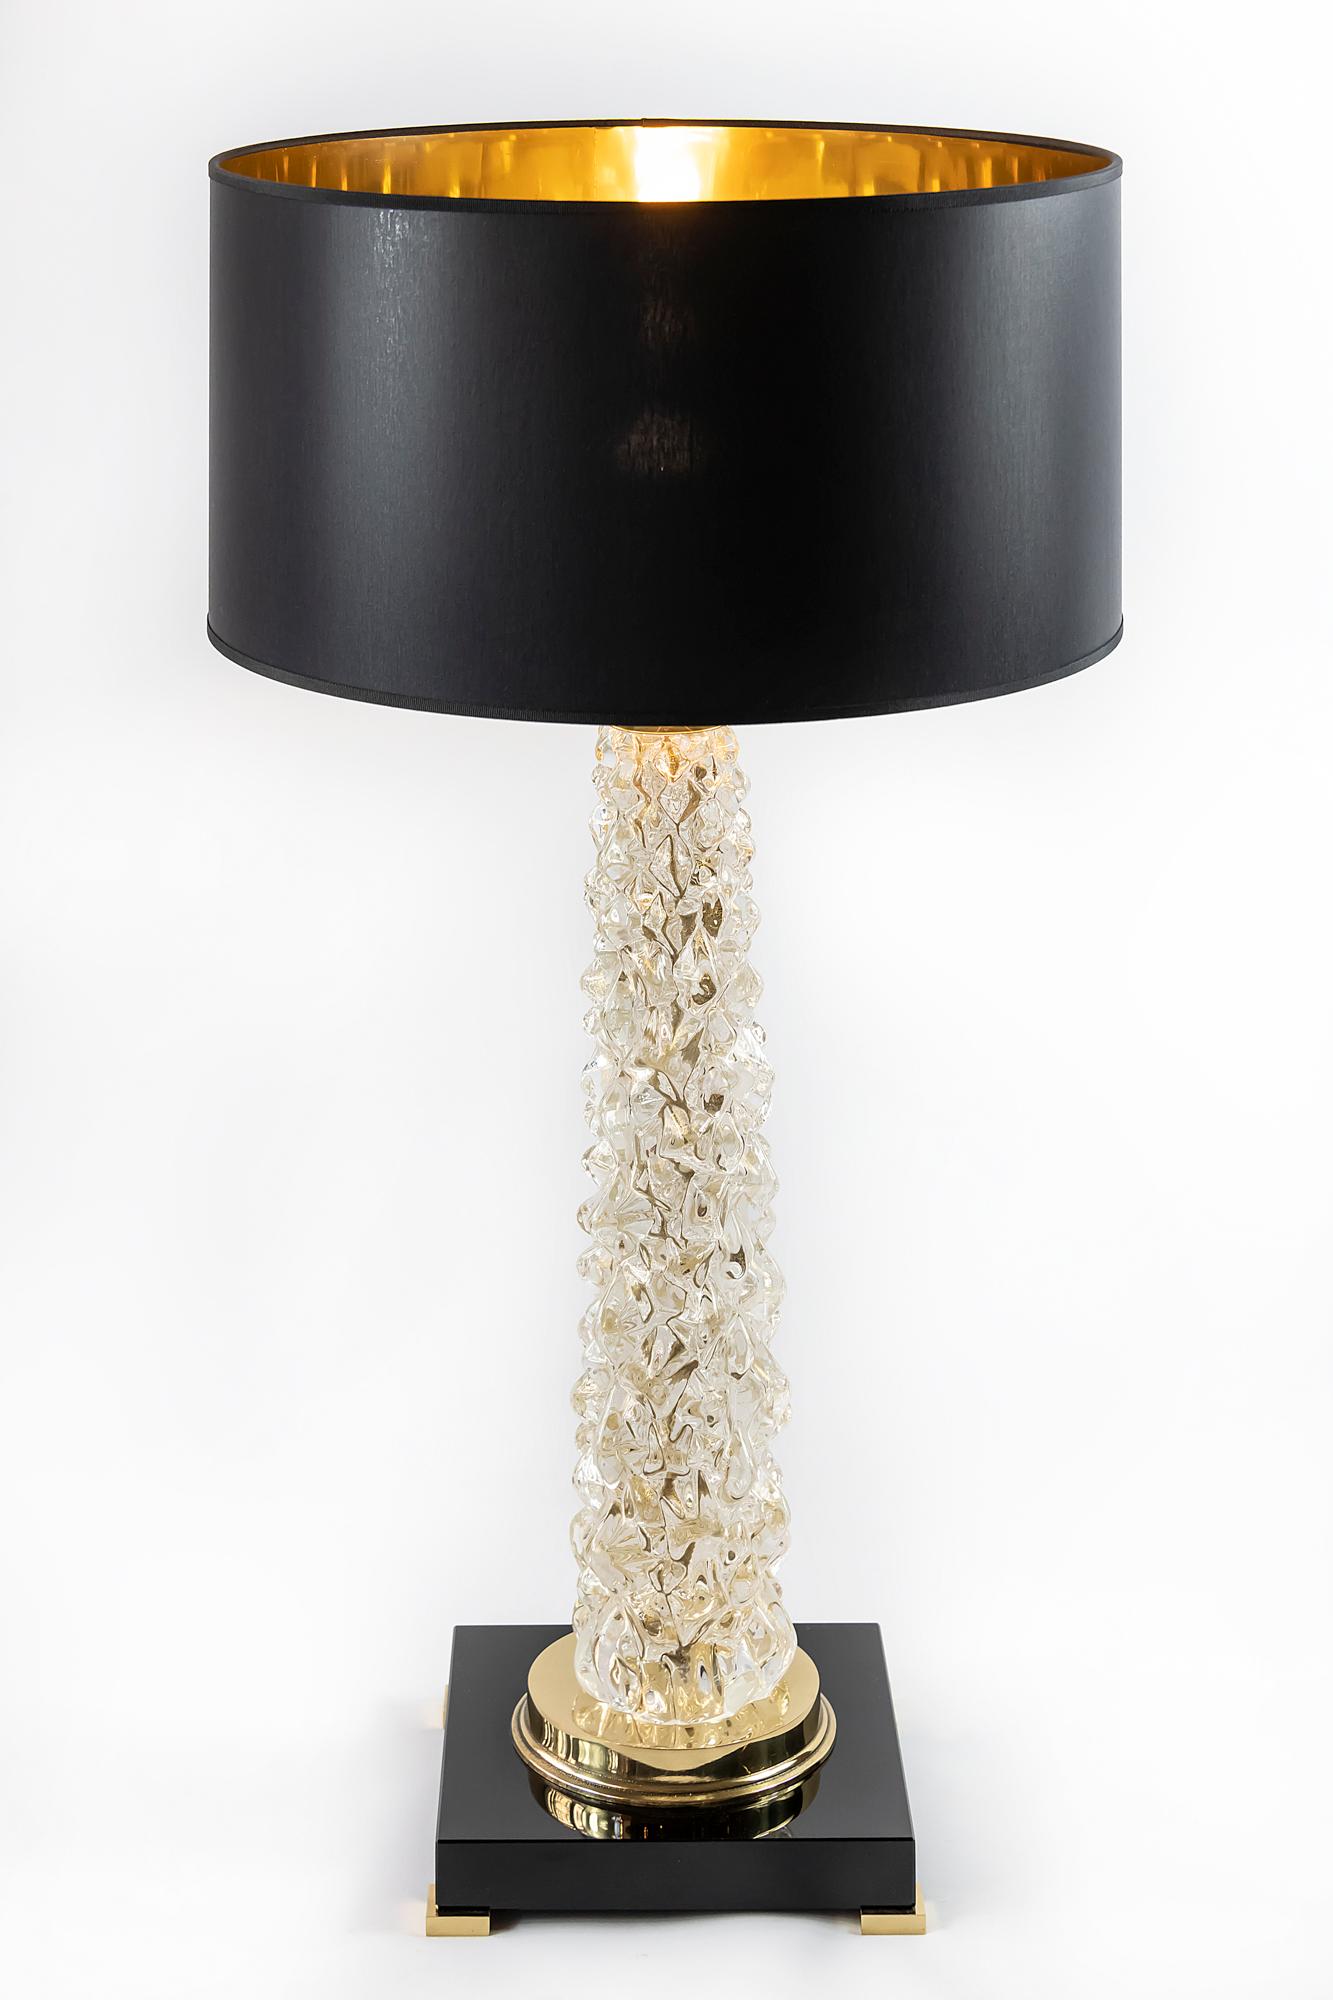 This pair of Italian table lamps are made of transparent Murano glass. The base is made of rectangular thick black glass with small brass legs. Decorated with polished brass details. Both lamps are with new made satin finish black color textile